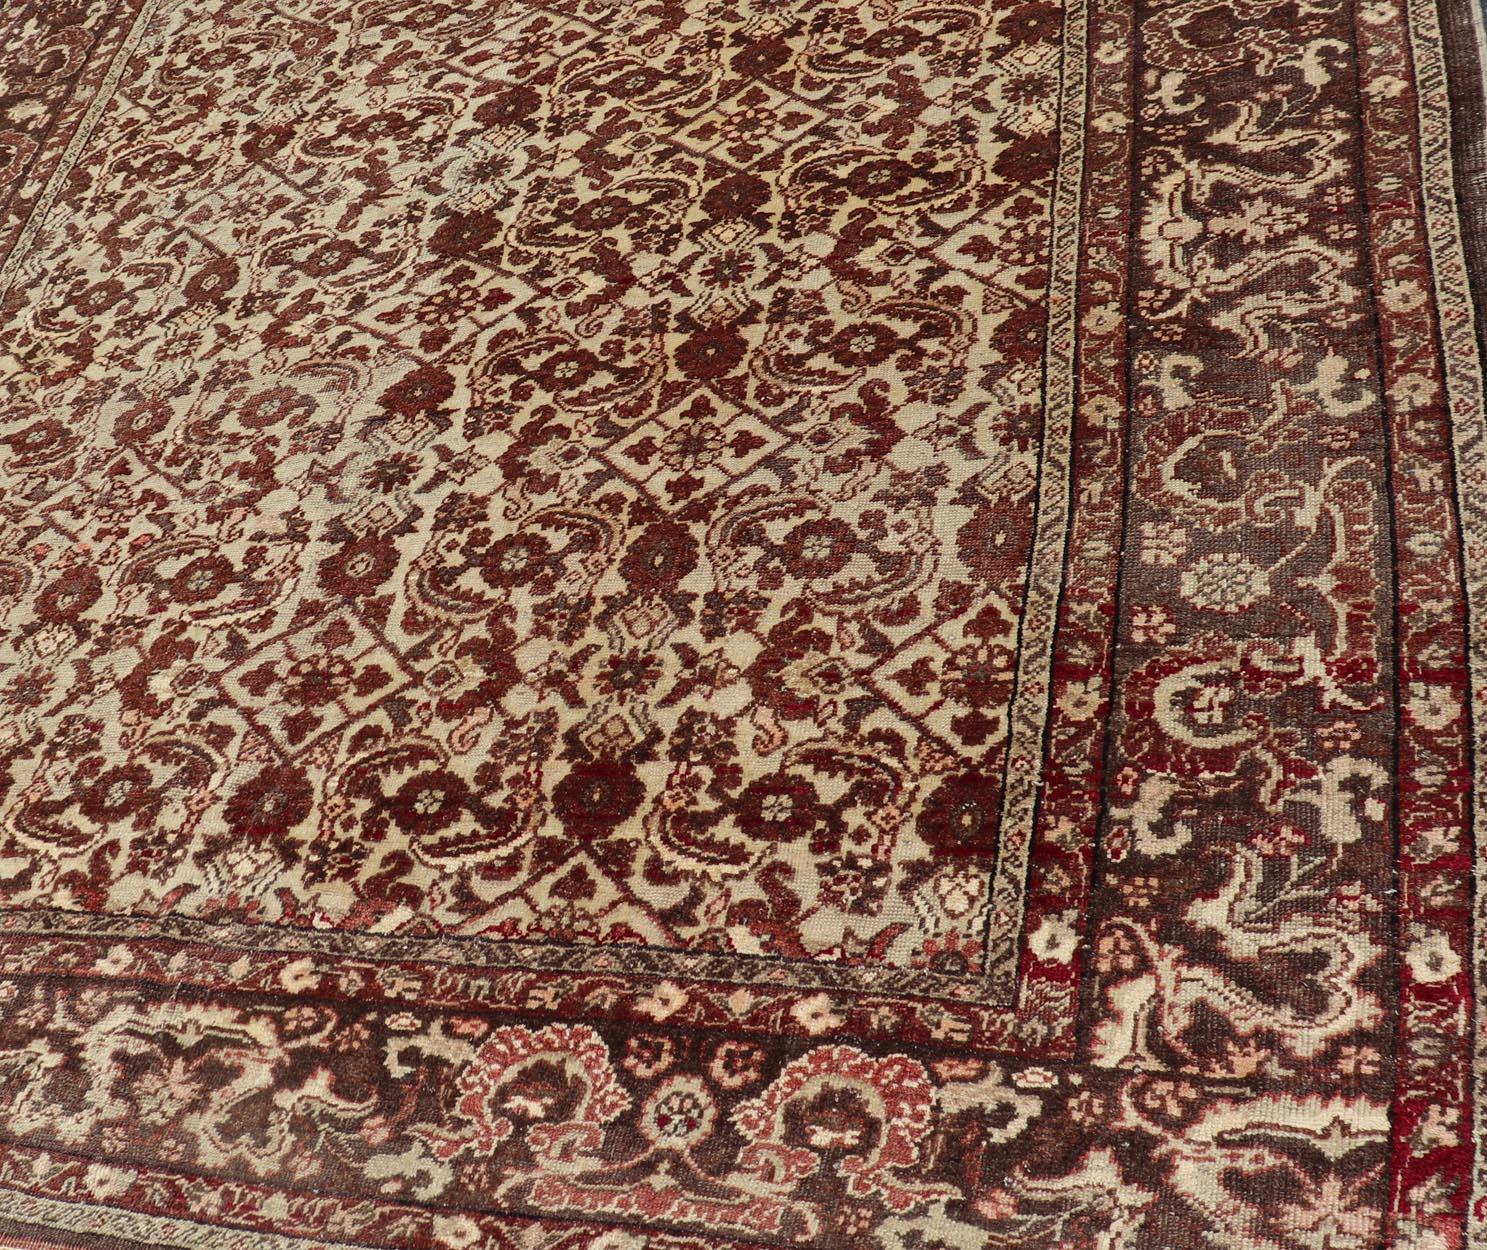 Antique Turkish Sivas Rug with Tan Background and Maroon, Eggplant, Brown Color  In Good Condition For Sale In Atlanta, GA